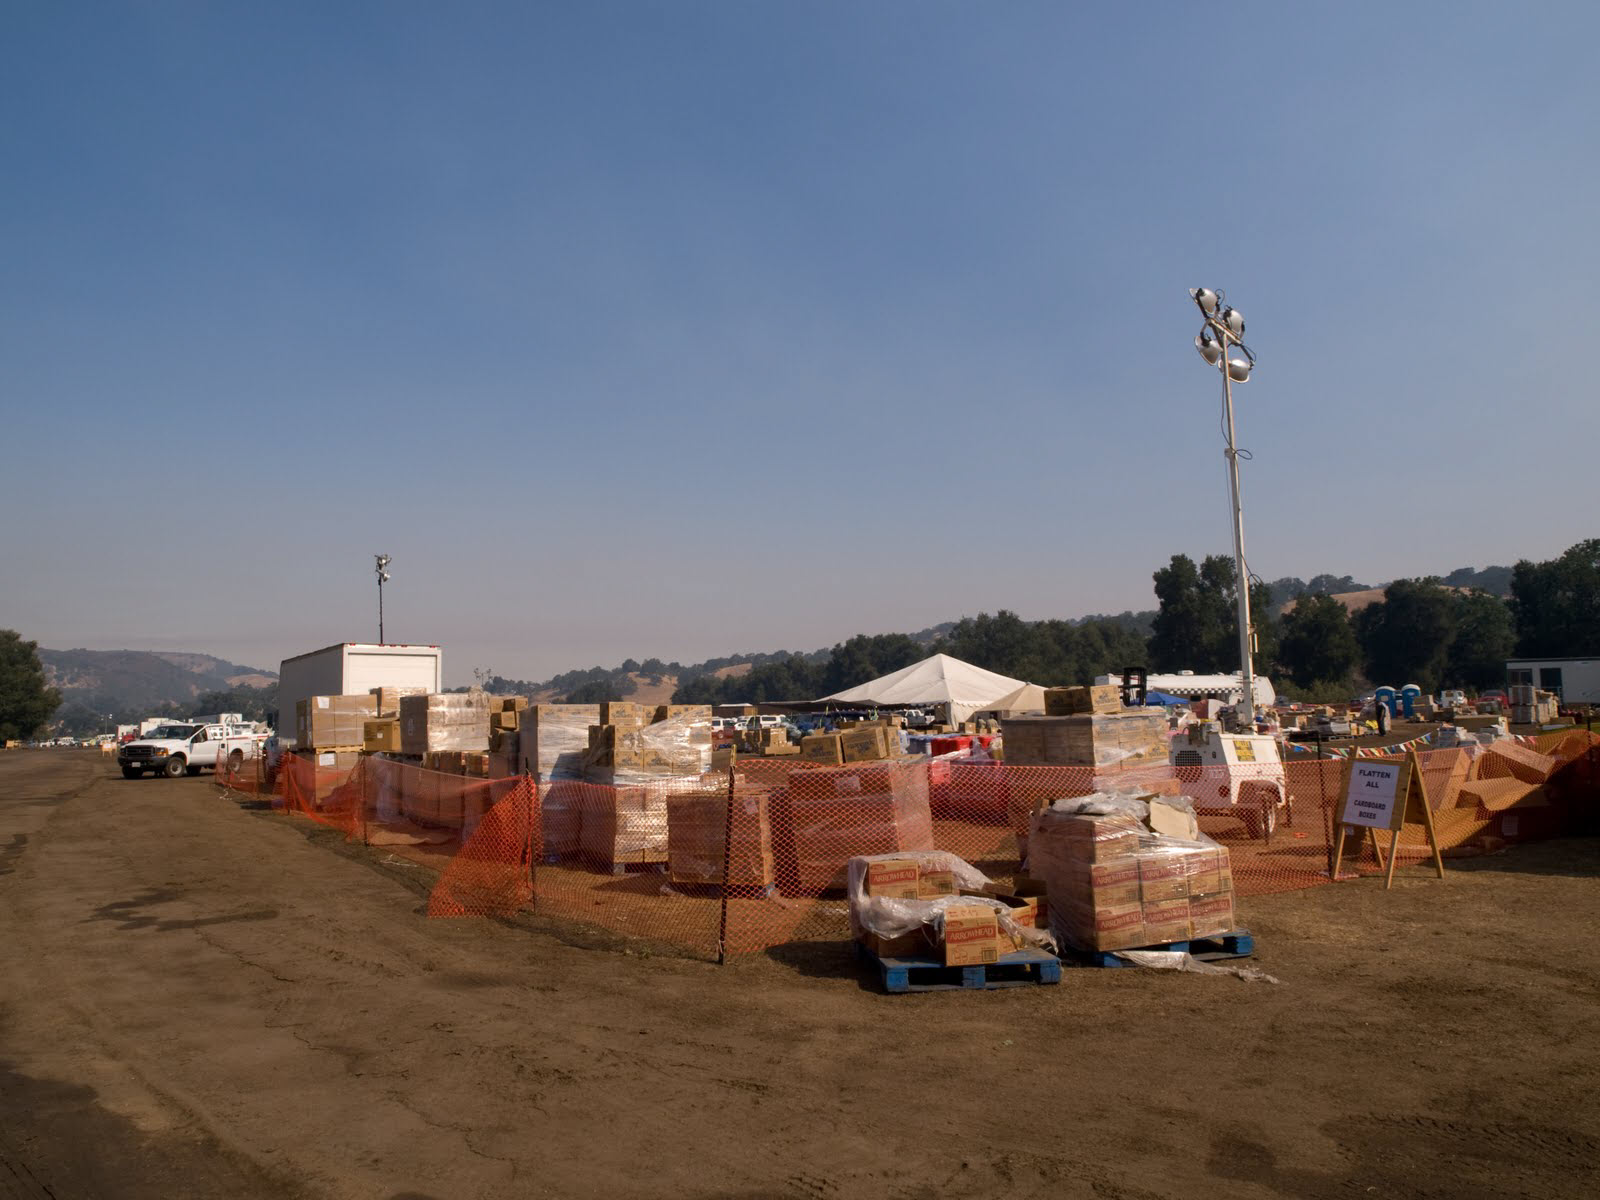 Boxes of supplies at a fire base camp.